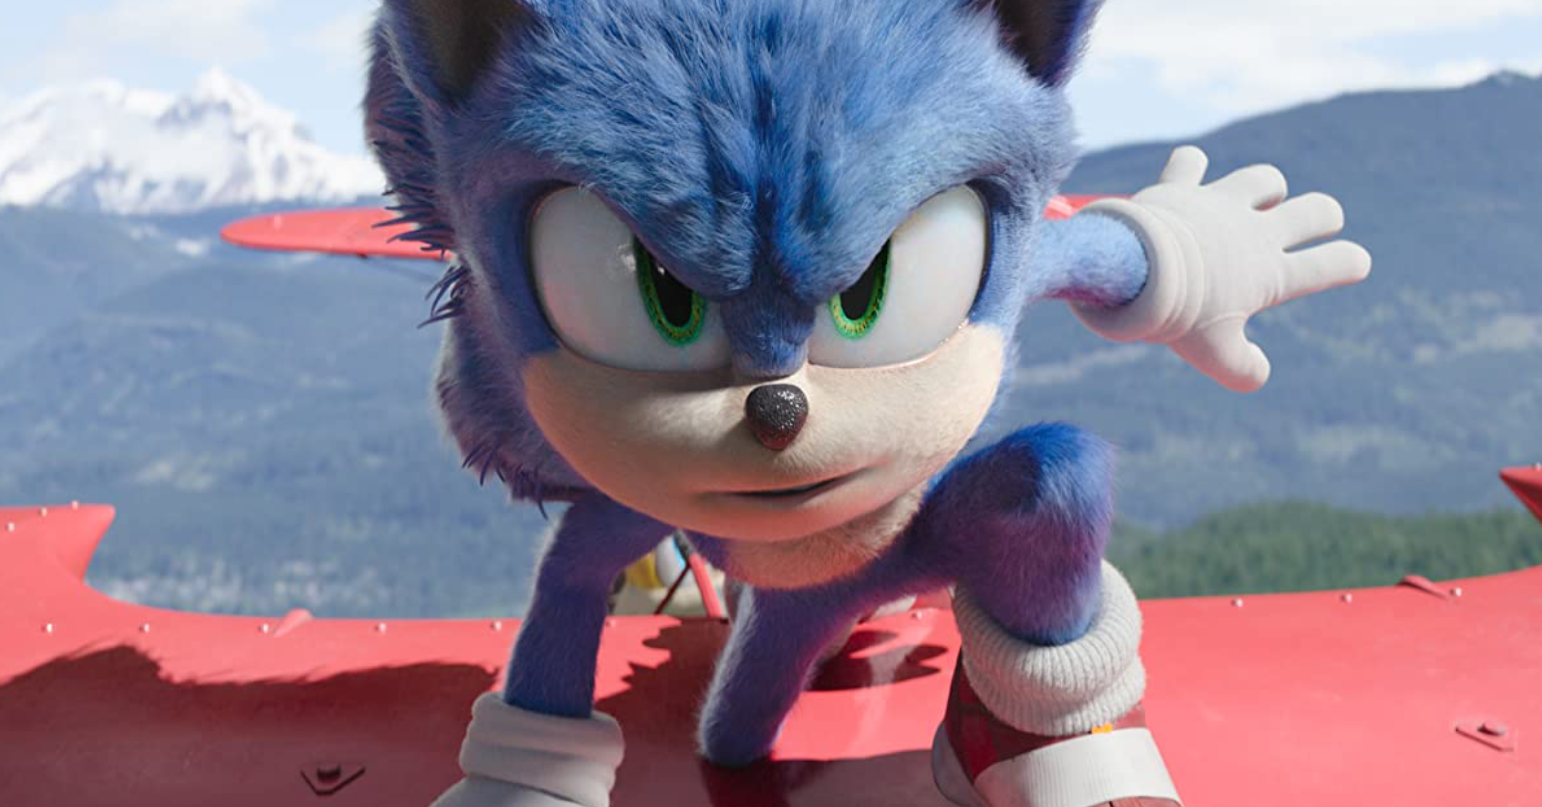 Final Electrifying Sonic The Hedgehog 2 Trailer Has Been Released